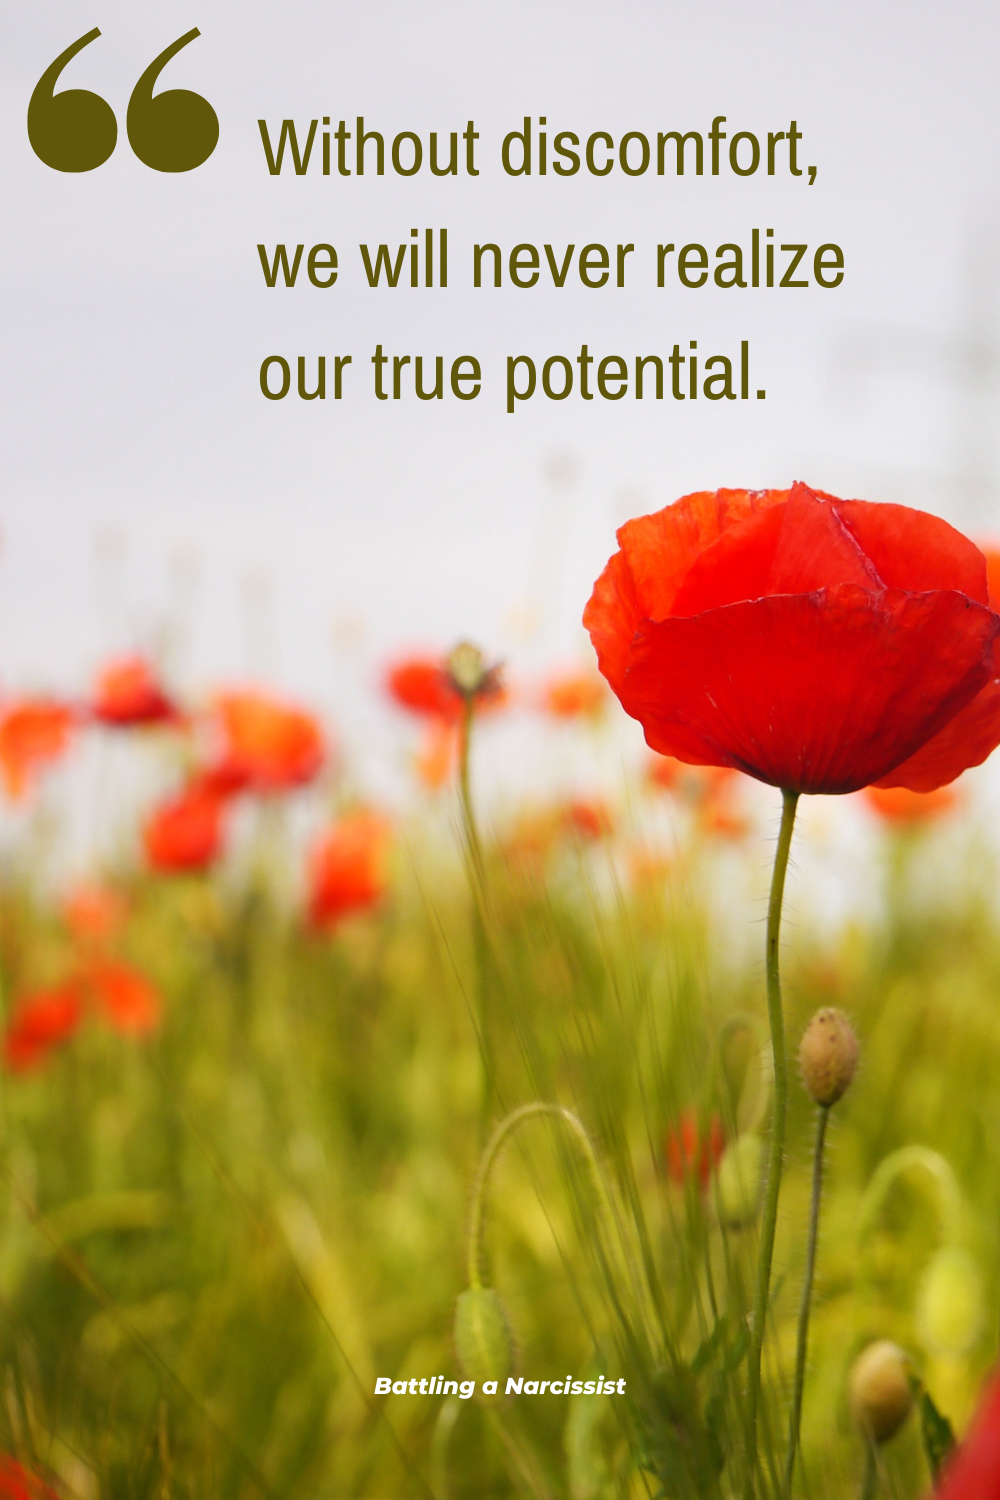 Without discomfort, we will never realize our true potential.